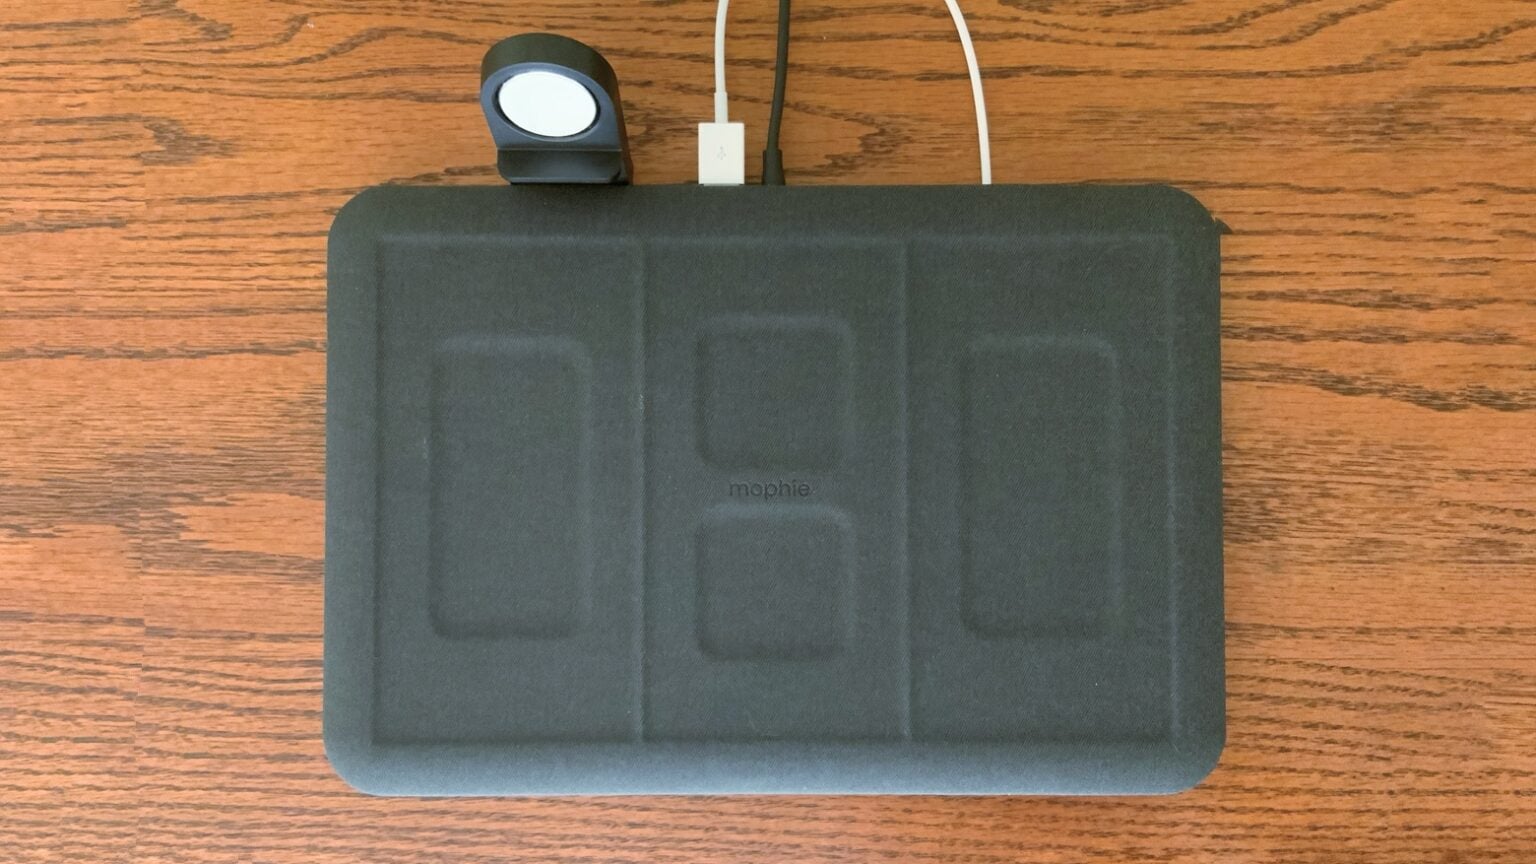 The Mophie 4-in-1 Wireless Charging Mat has room for 3 iPhones.